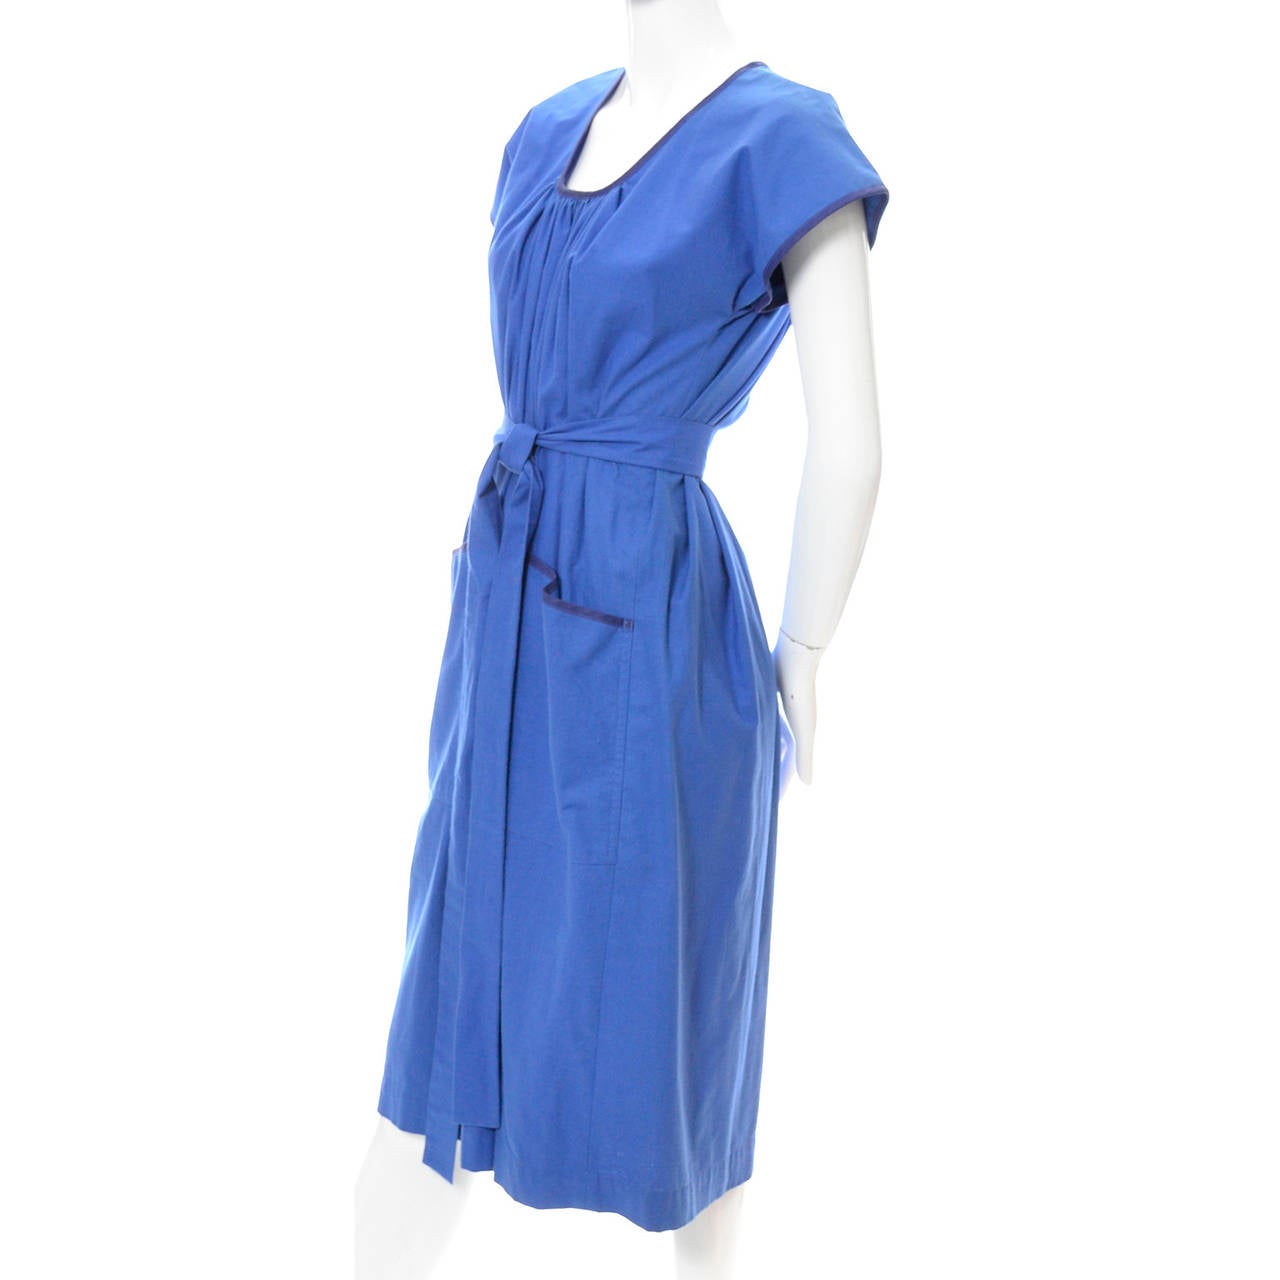 This 1970's vintage dress is from Yves Saint Laurent and has the Rive Gauche label. This YSL vintage dress has front pockets and the original fabric sash. This is a loose fitting, peasant style dress that cinches at the waist. This dress is in